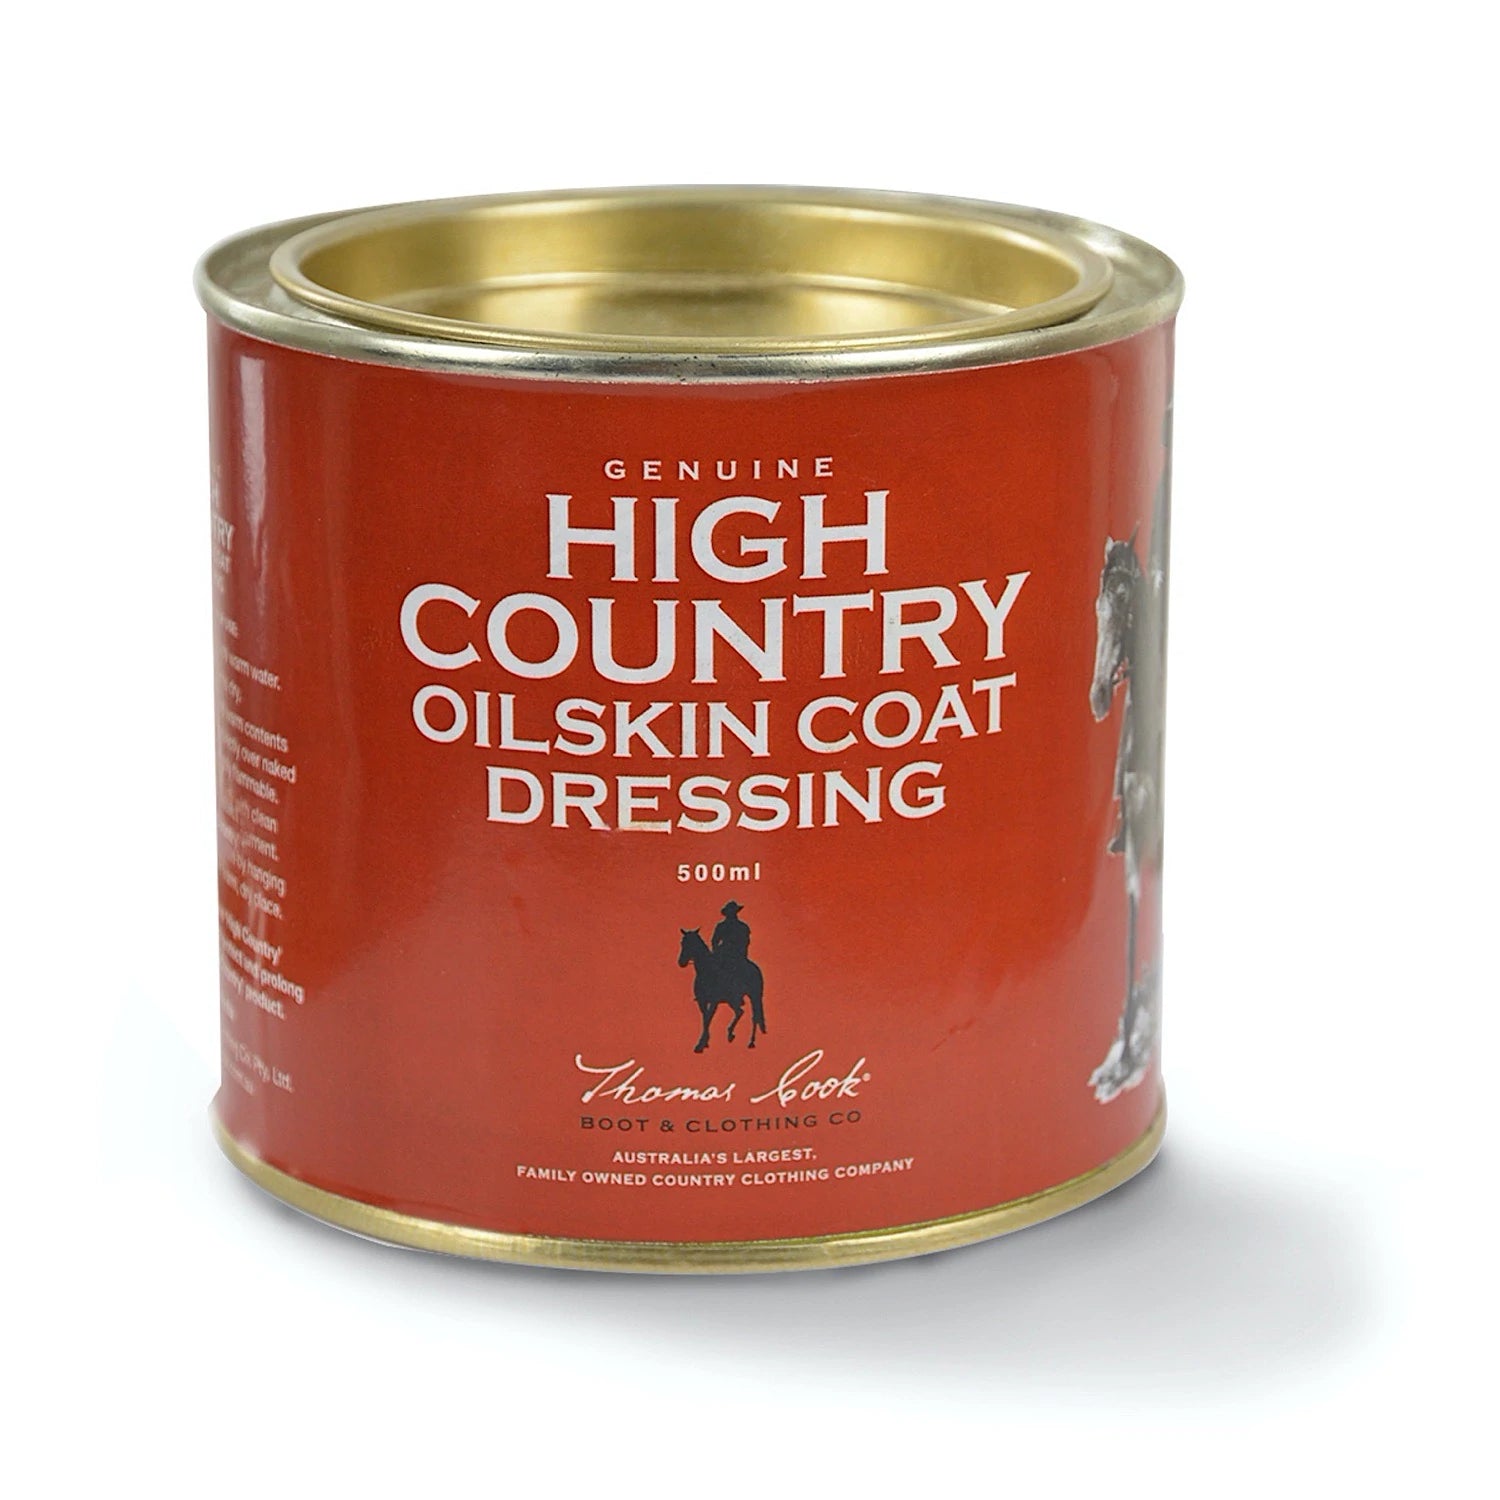 Thomas Cook High Country Oilskin Coat Dressing